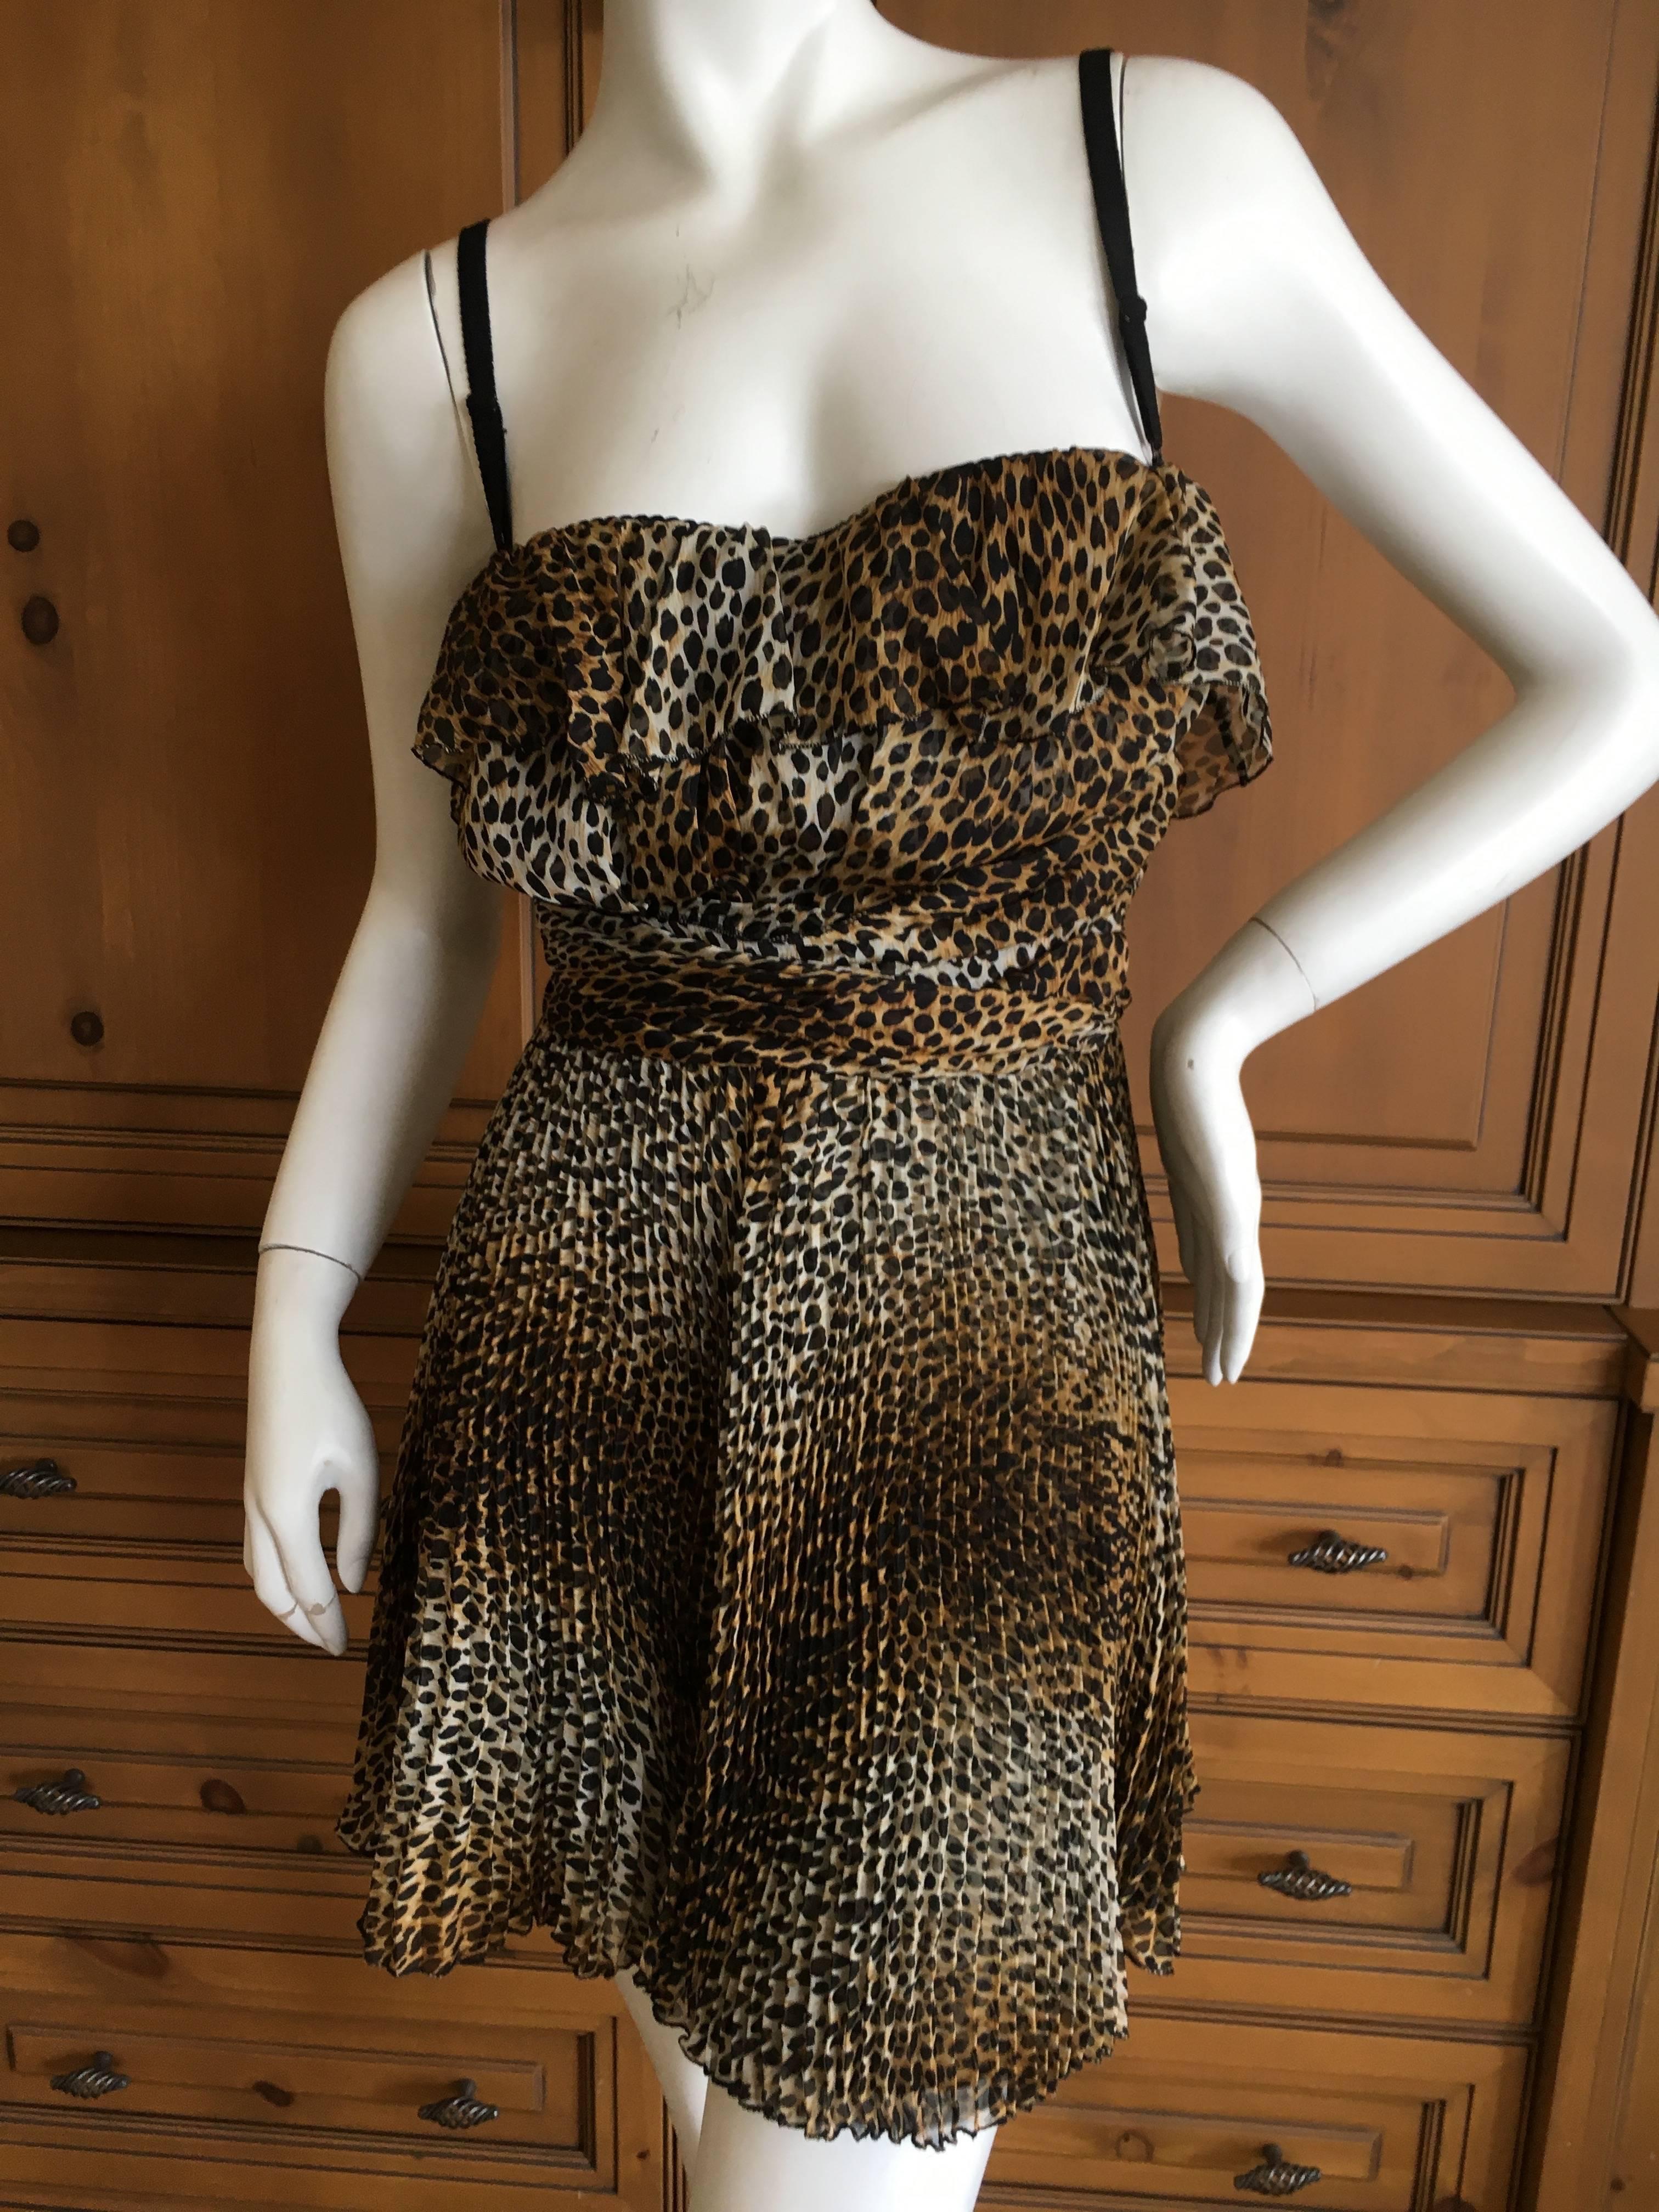 Vintage D&G Leopard Print Silk Mini Dress.
Can be worn with or with out straps
 Size 40
Bust 36"
Waist 26
Hips 36 " 